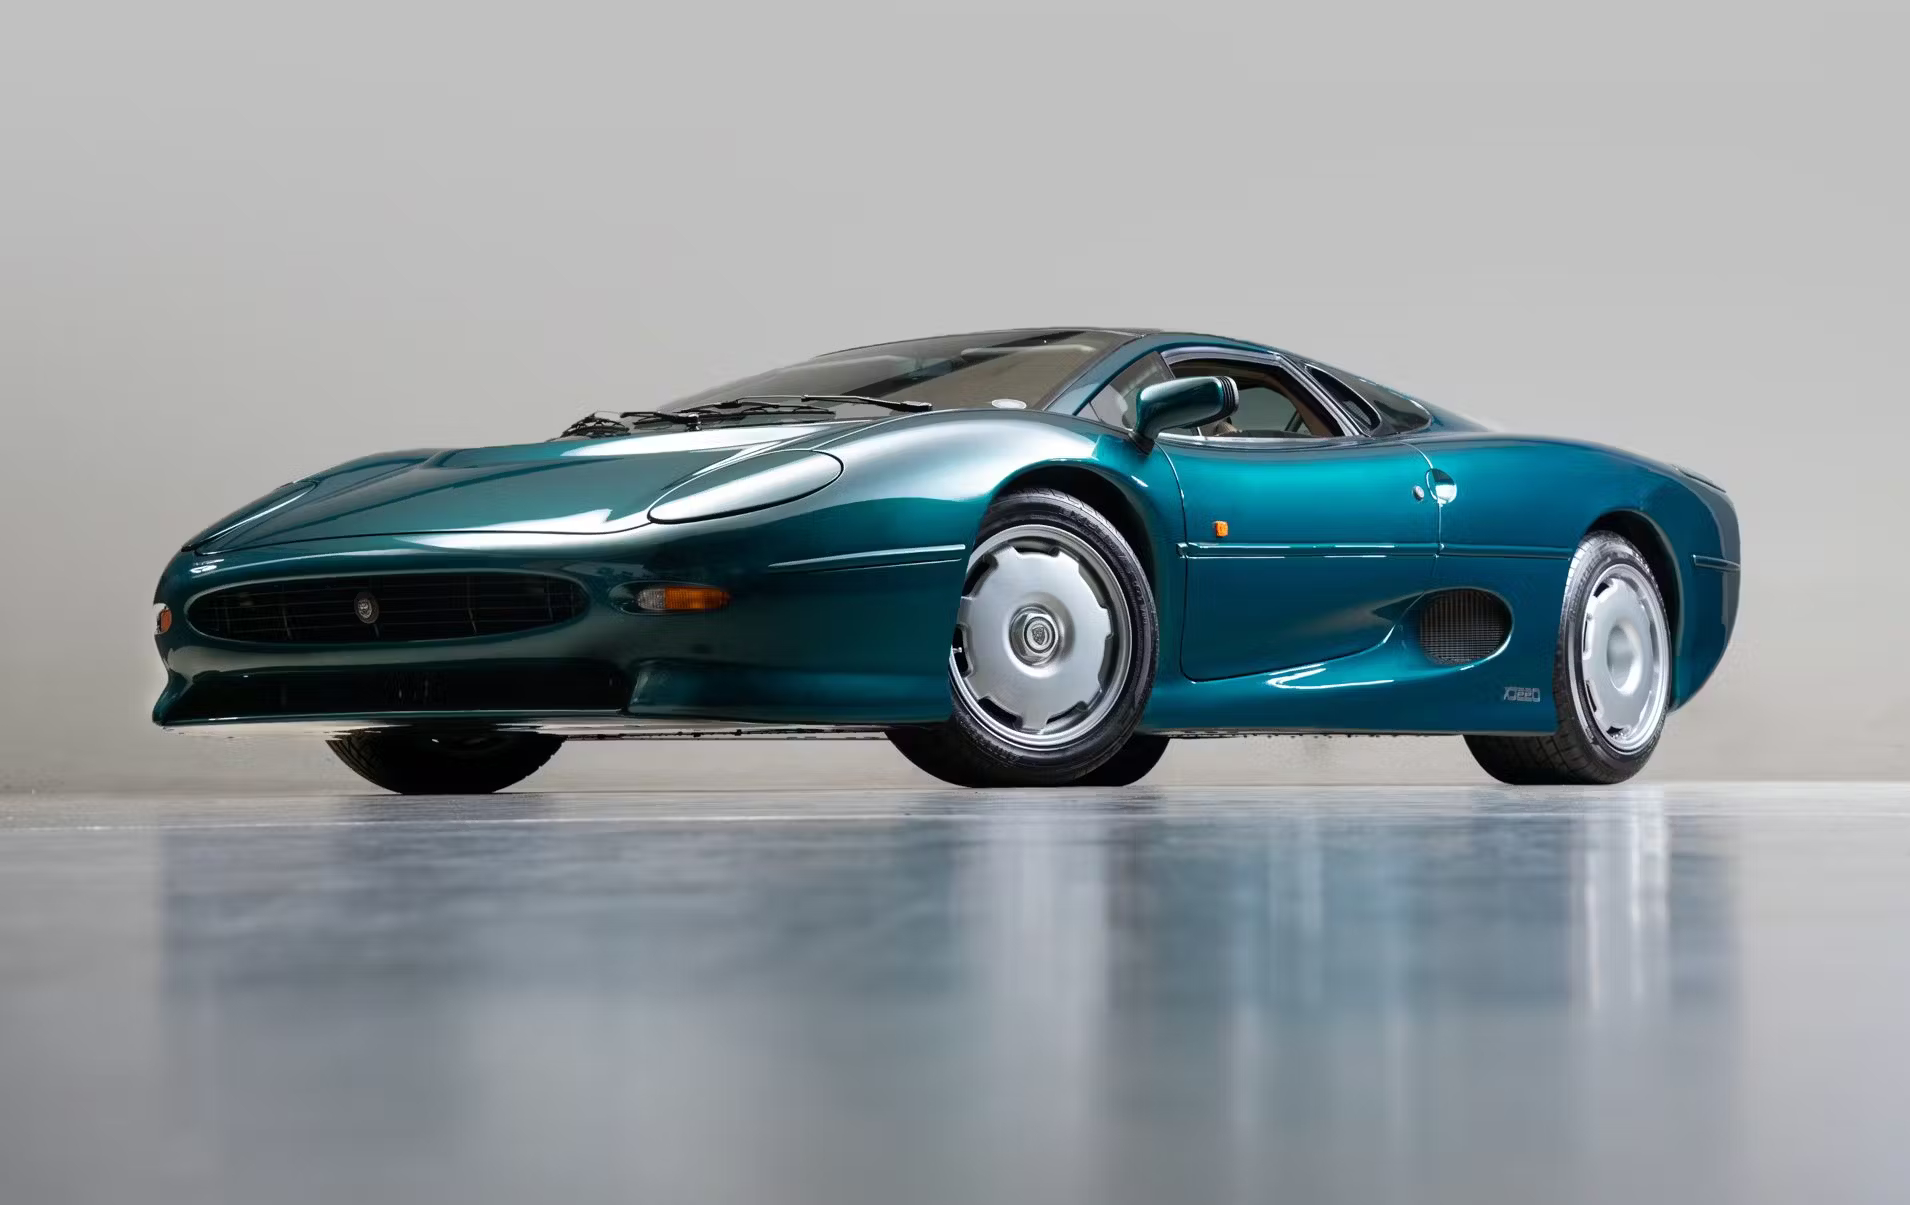 Image showing the low-slung side profile of a green Jaguar XJ220.